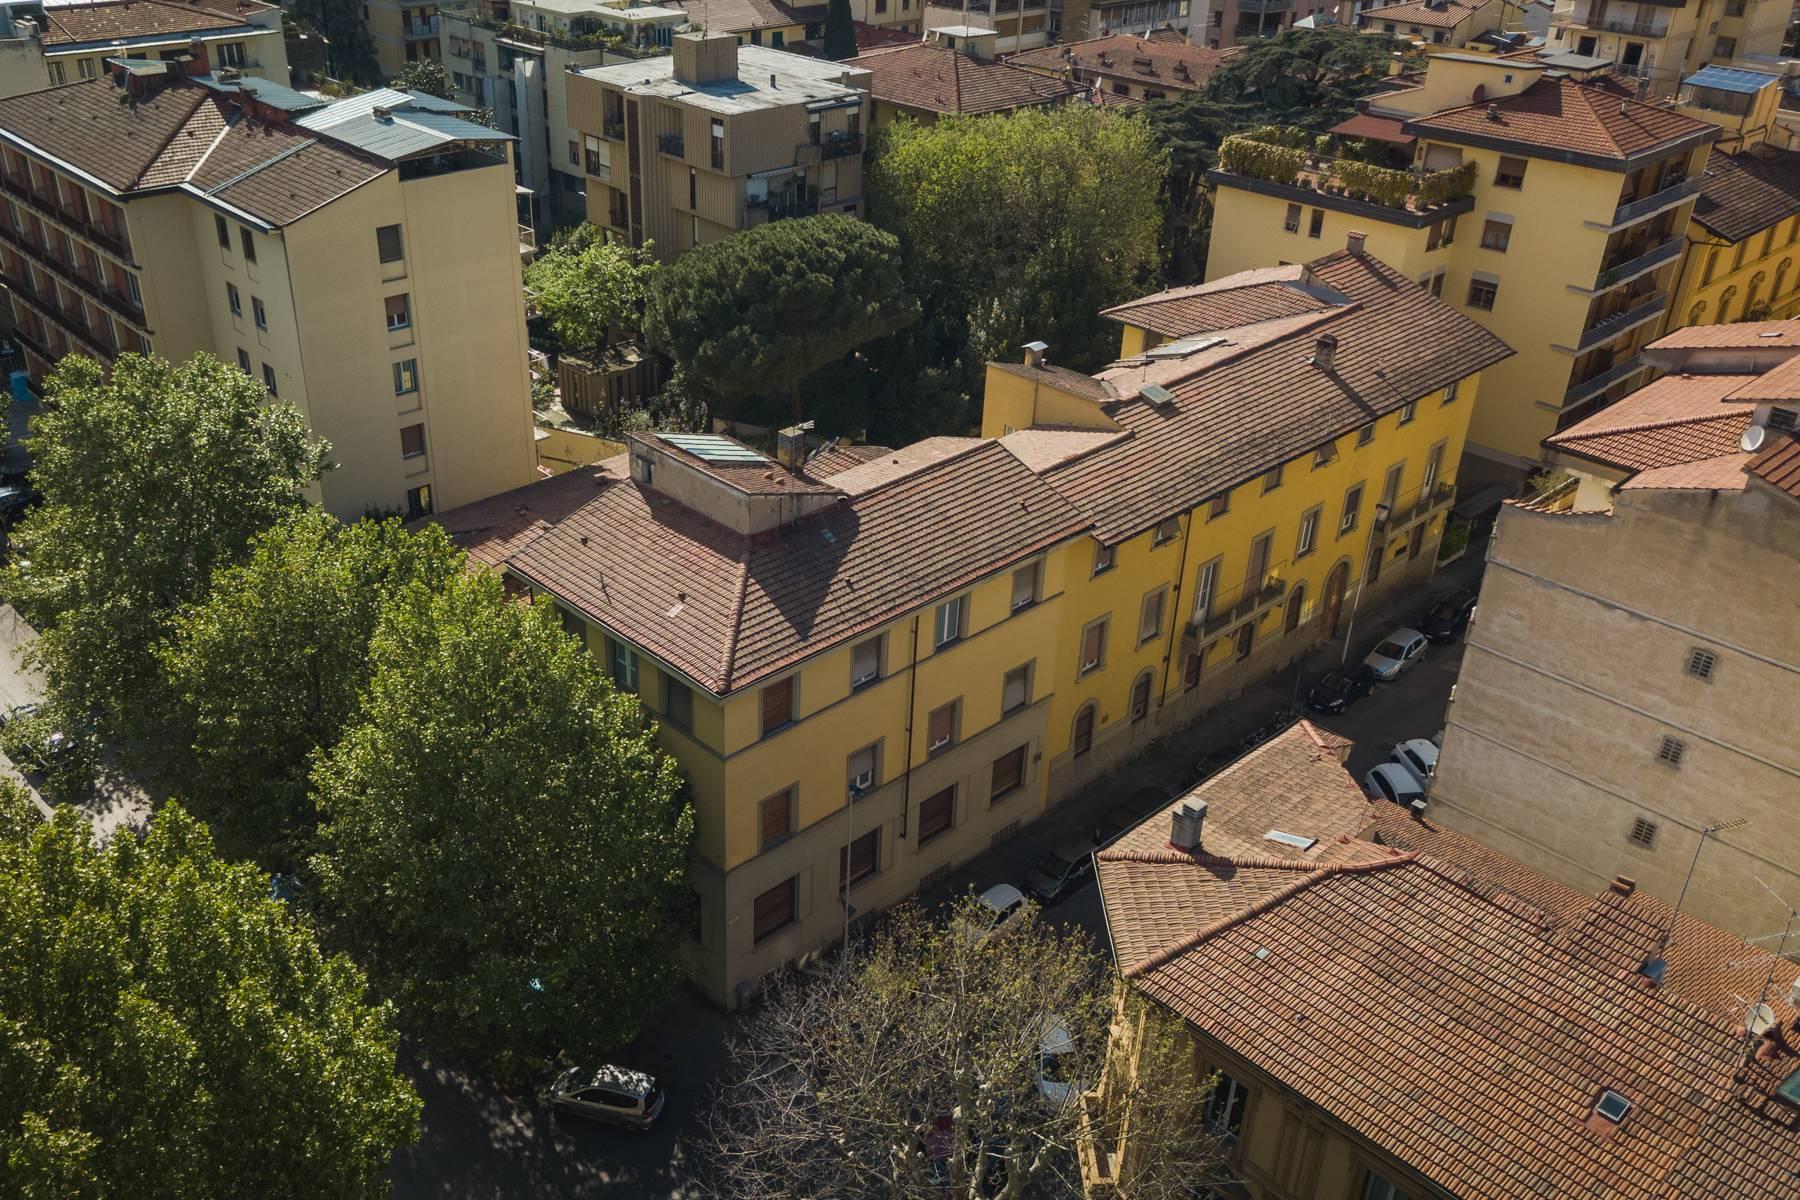 Two entire buildings in Beccaria residential area of Florence - 1